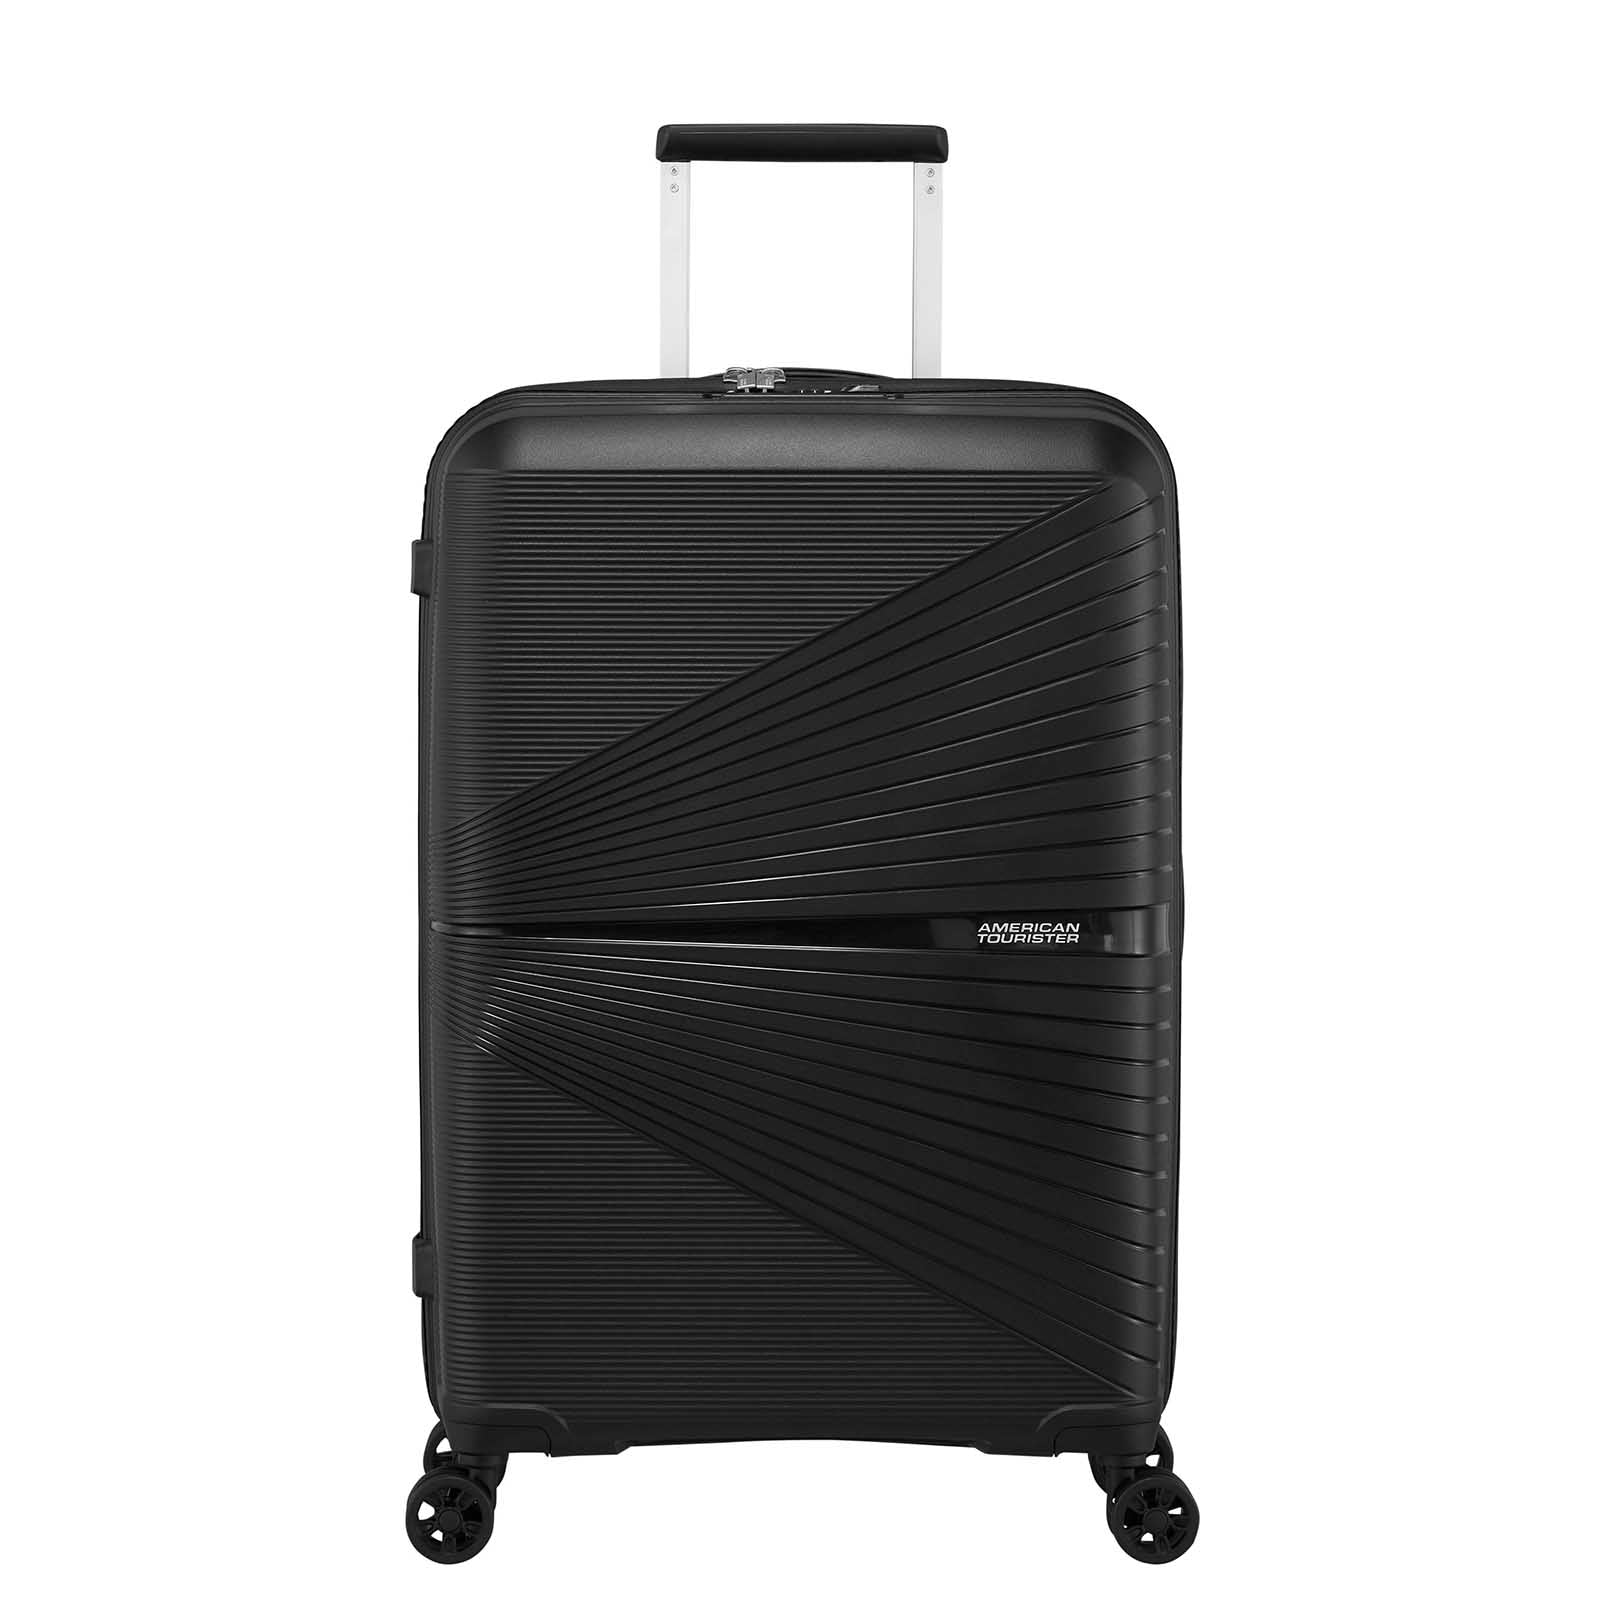 American-Tourister-Airconic-67cm-Suitcase-Onyx-Black-Front